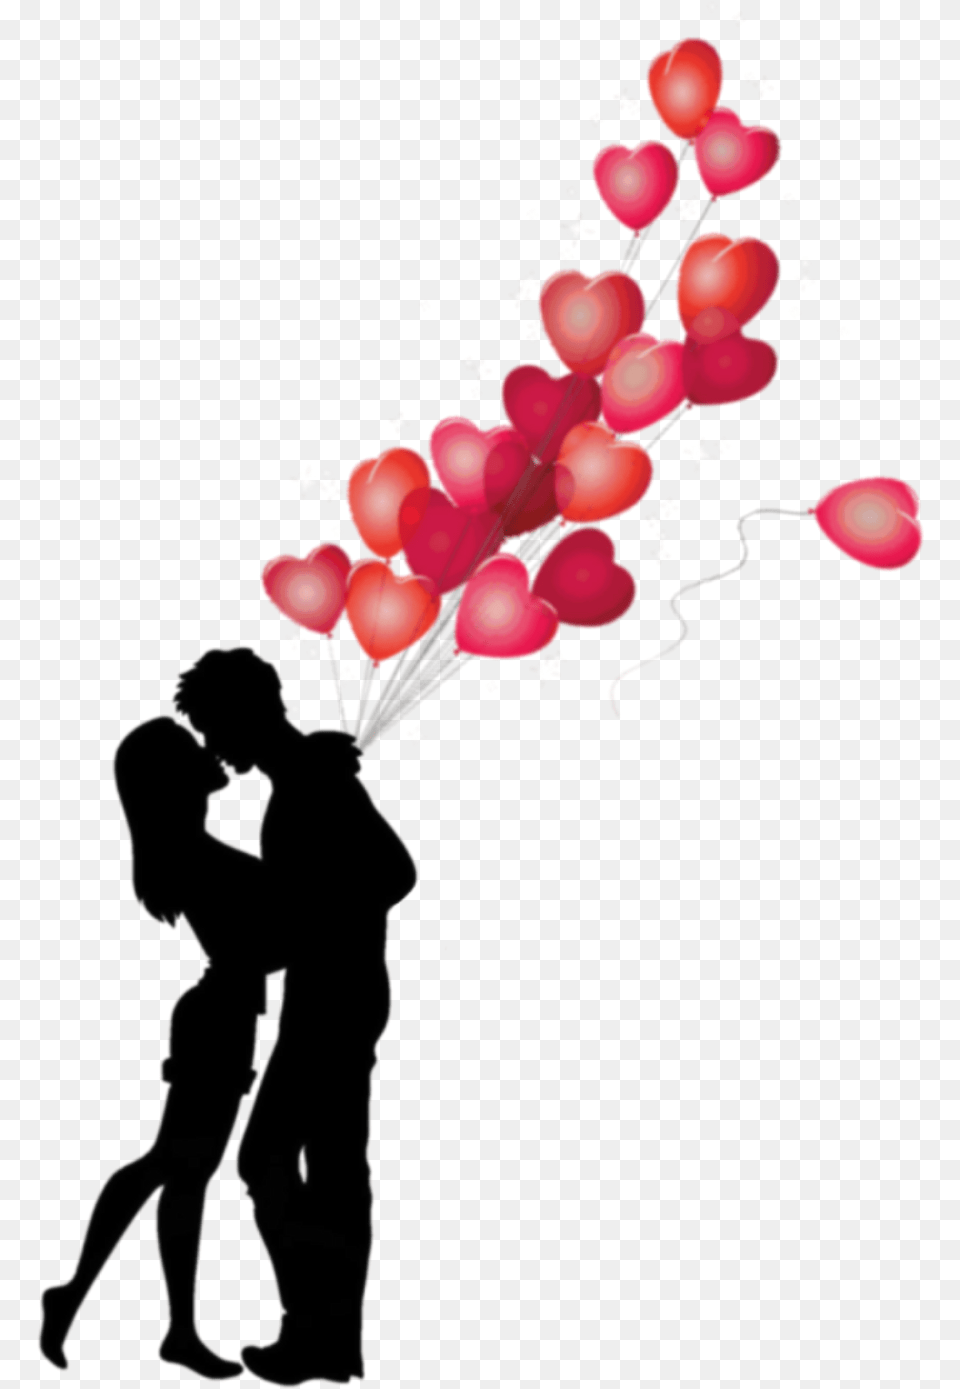 Love Hearts Silhouette Valentine Romantic Couple, Art, Balloon, Graphics, Flower Png